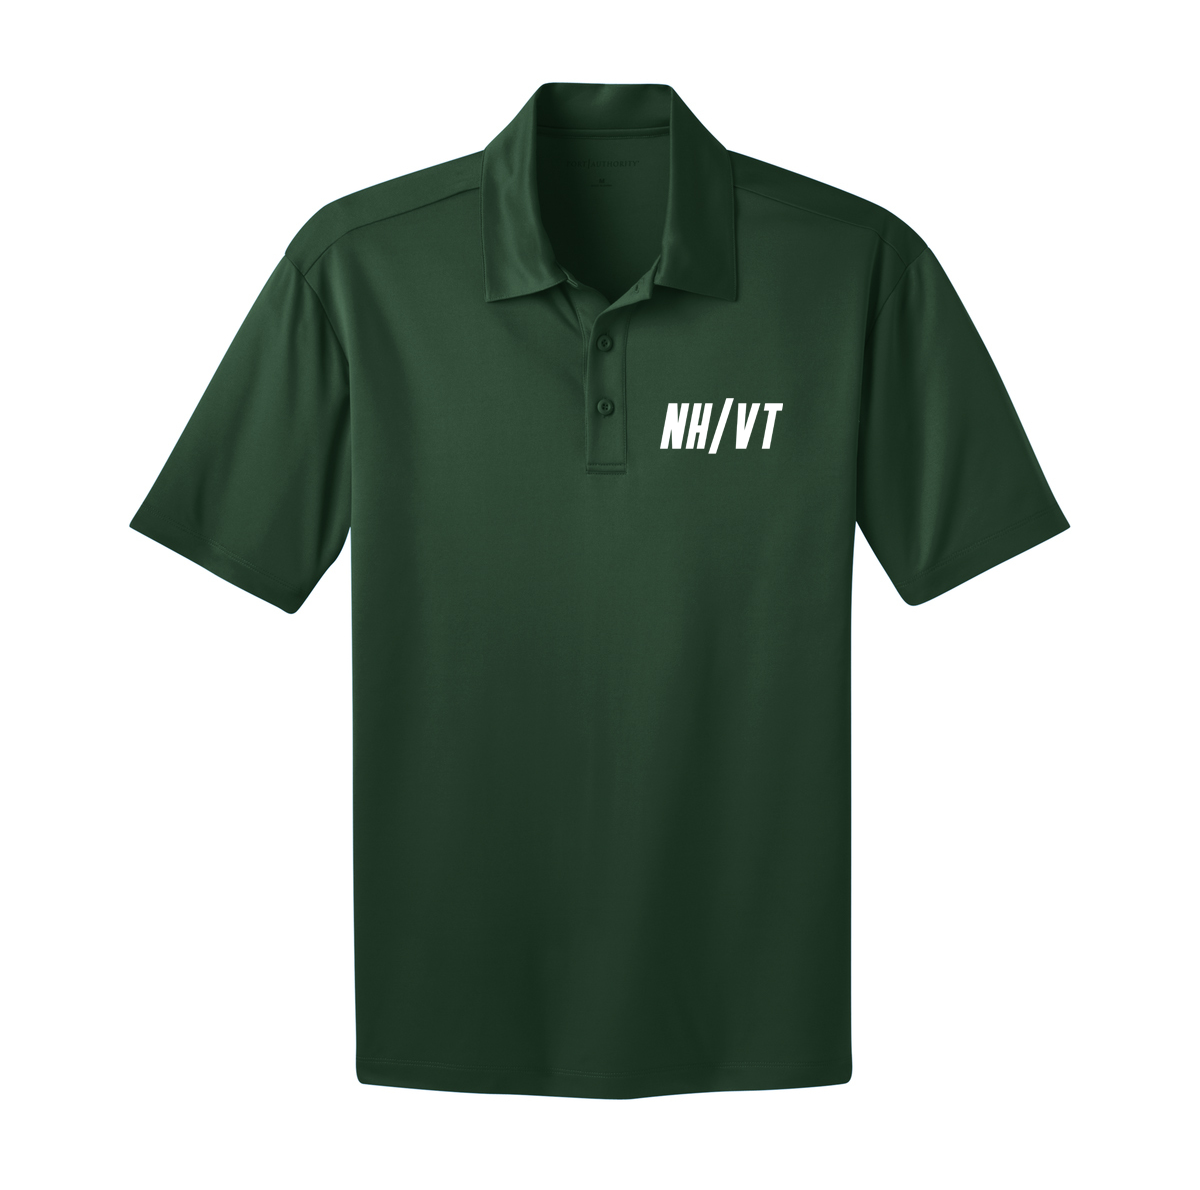 NH/VT Lacrosse - Men's Coaching Polo - Forest Green